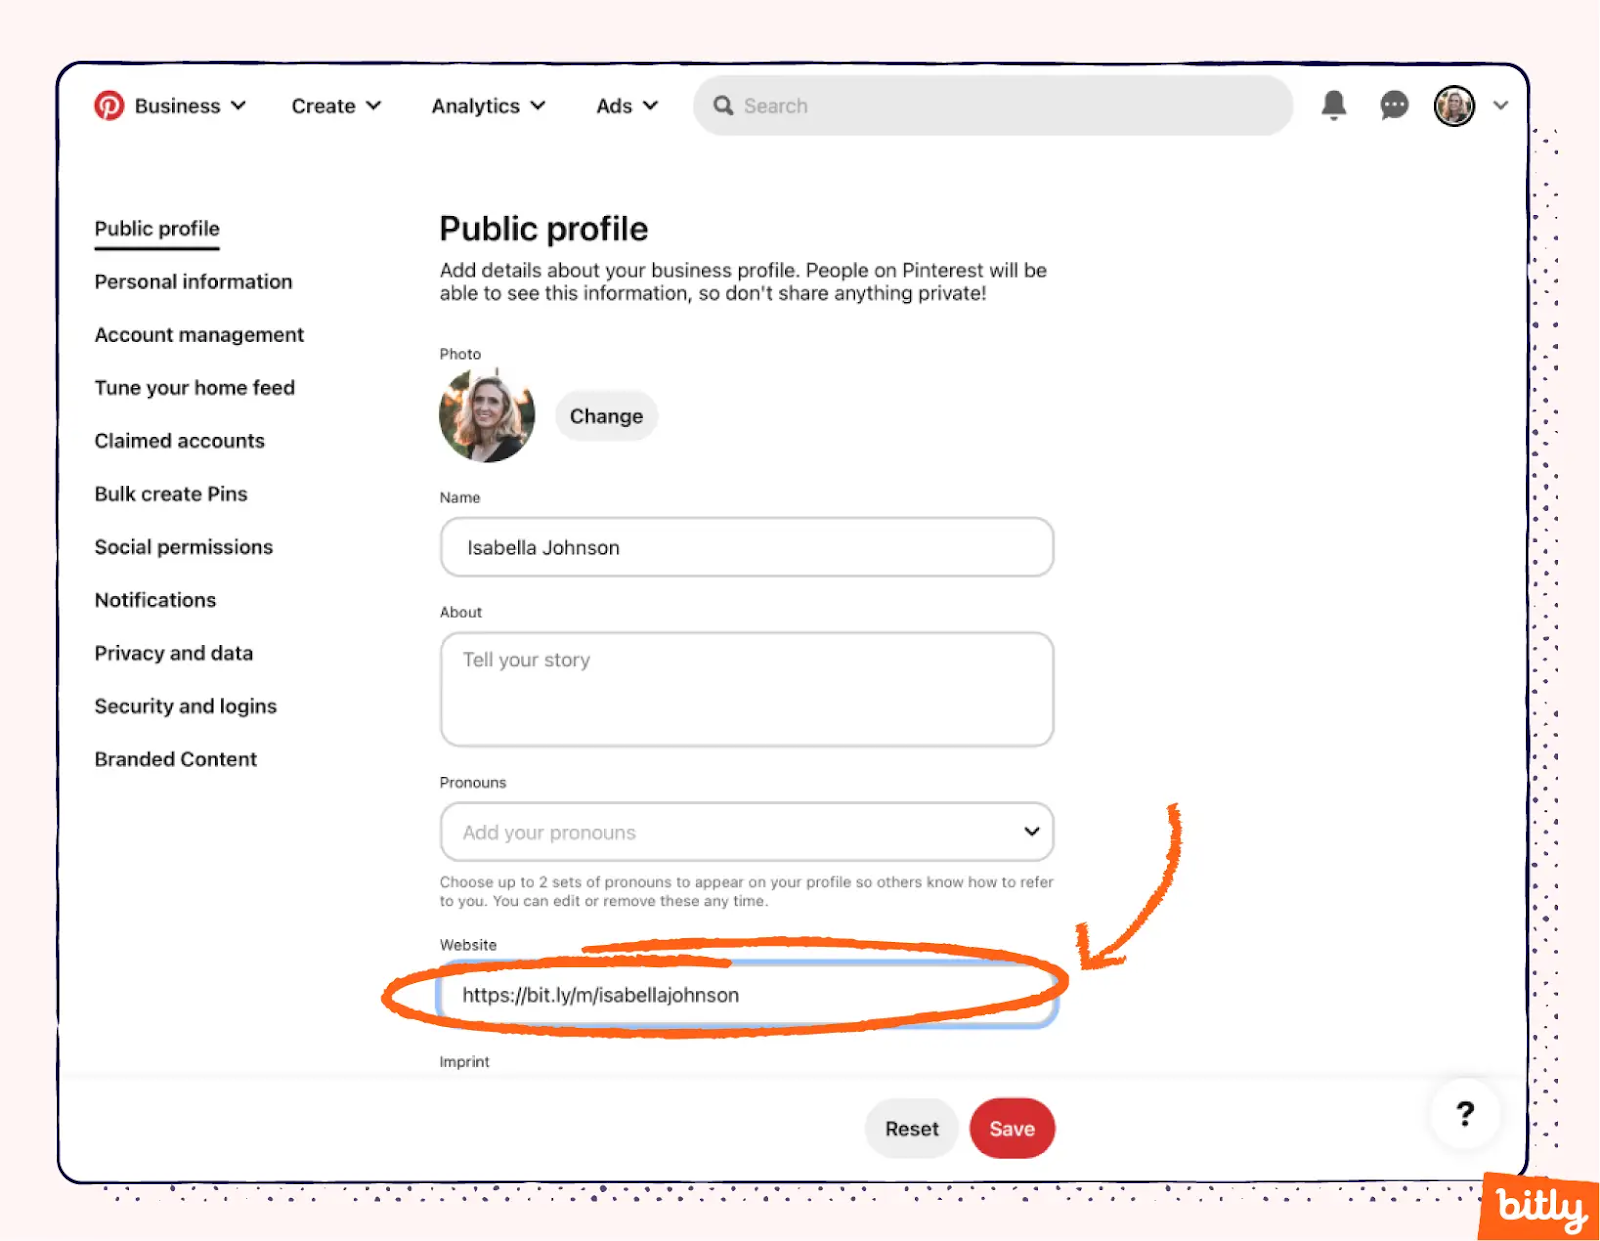 An example of where to add your Bitly link on the Pinterest site